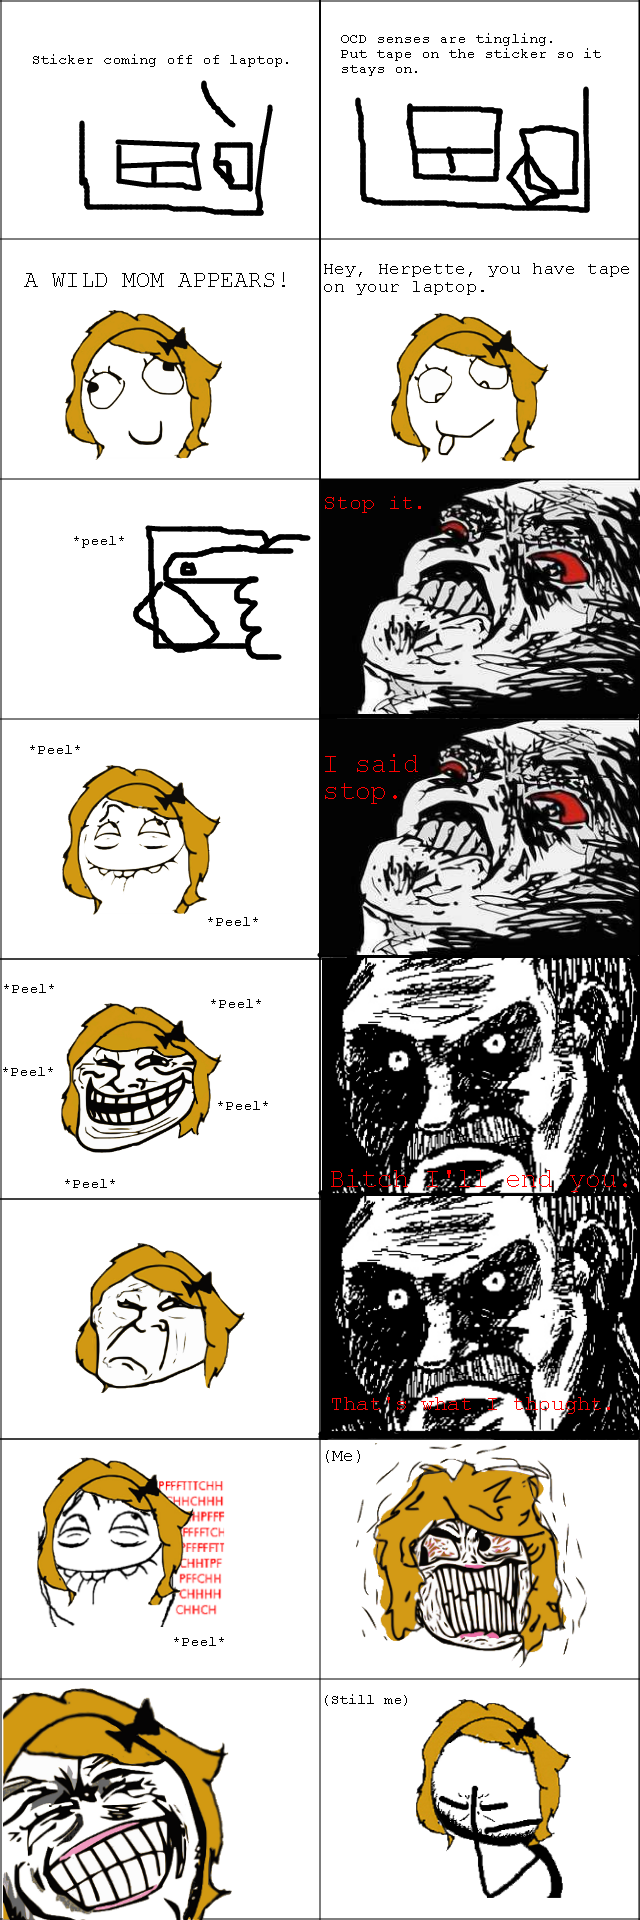 Troll Mom. 100% OC. This is what my mom does to piss me off since she knows I'm OCD about my things. In case you haven't noticed, I suck at making comics. If th